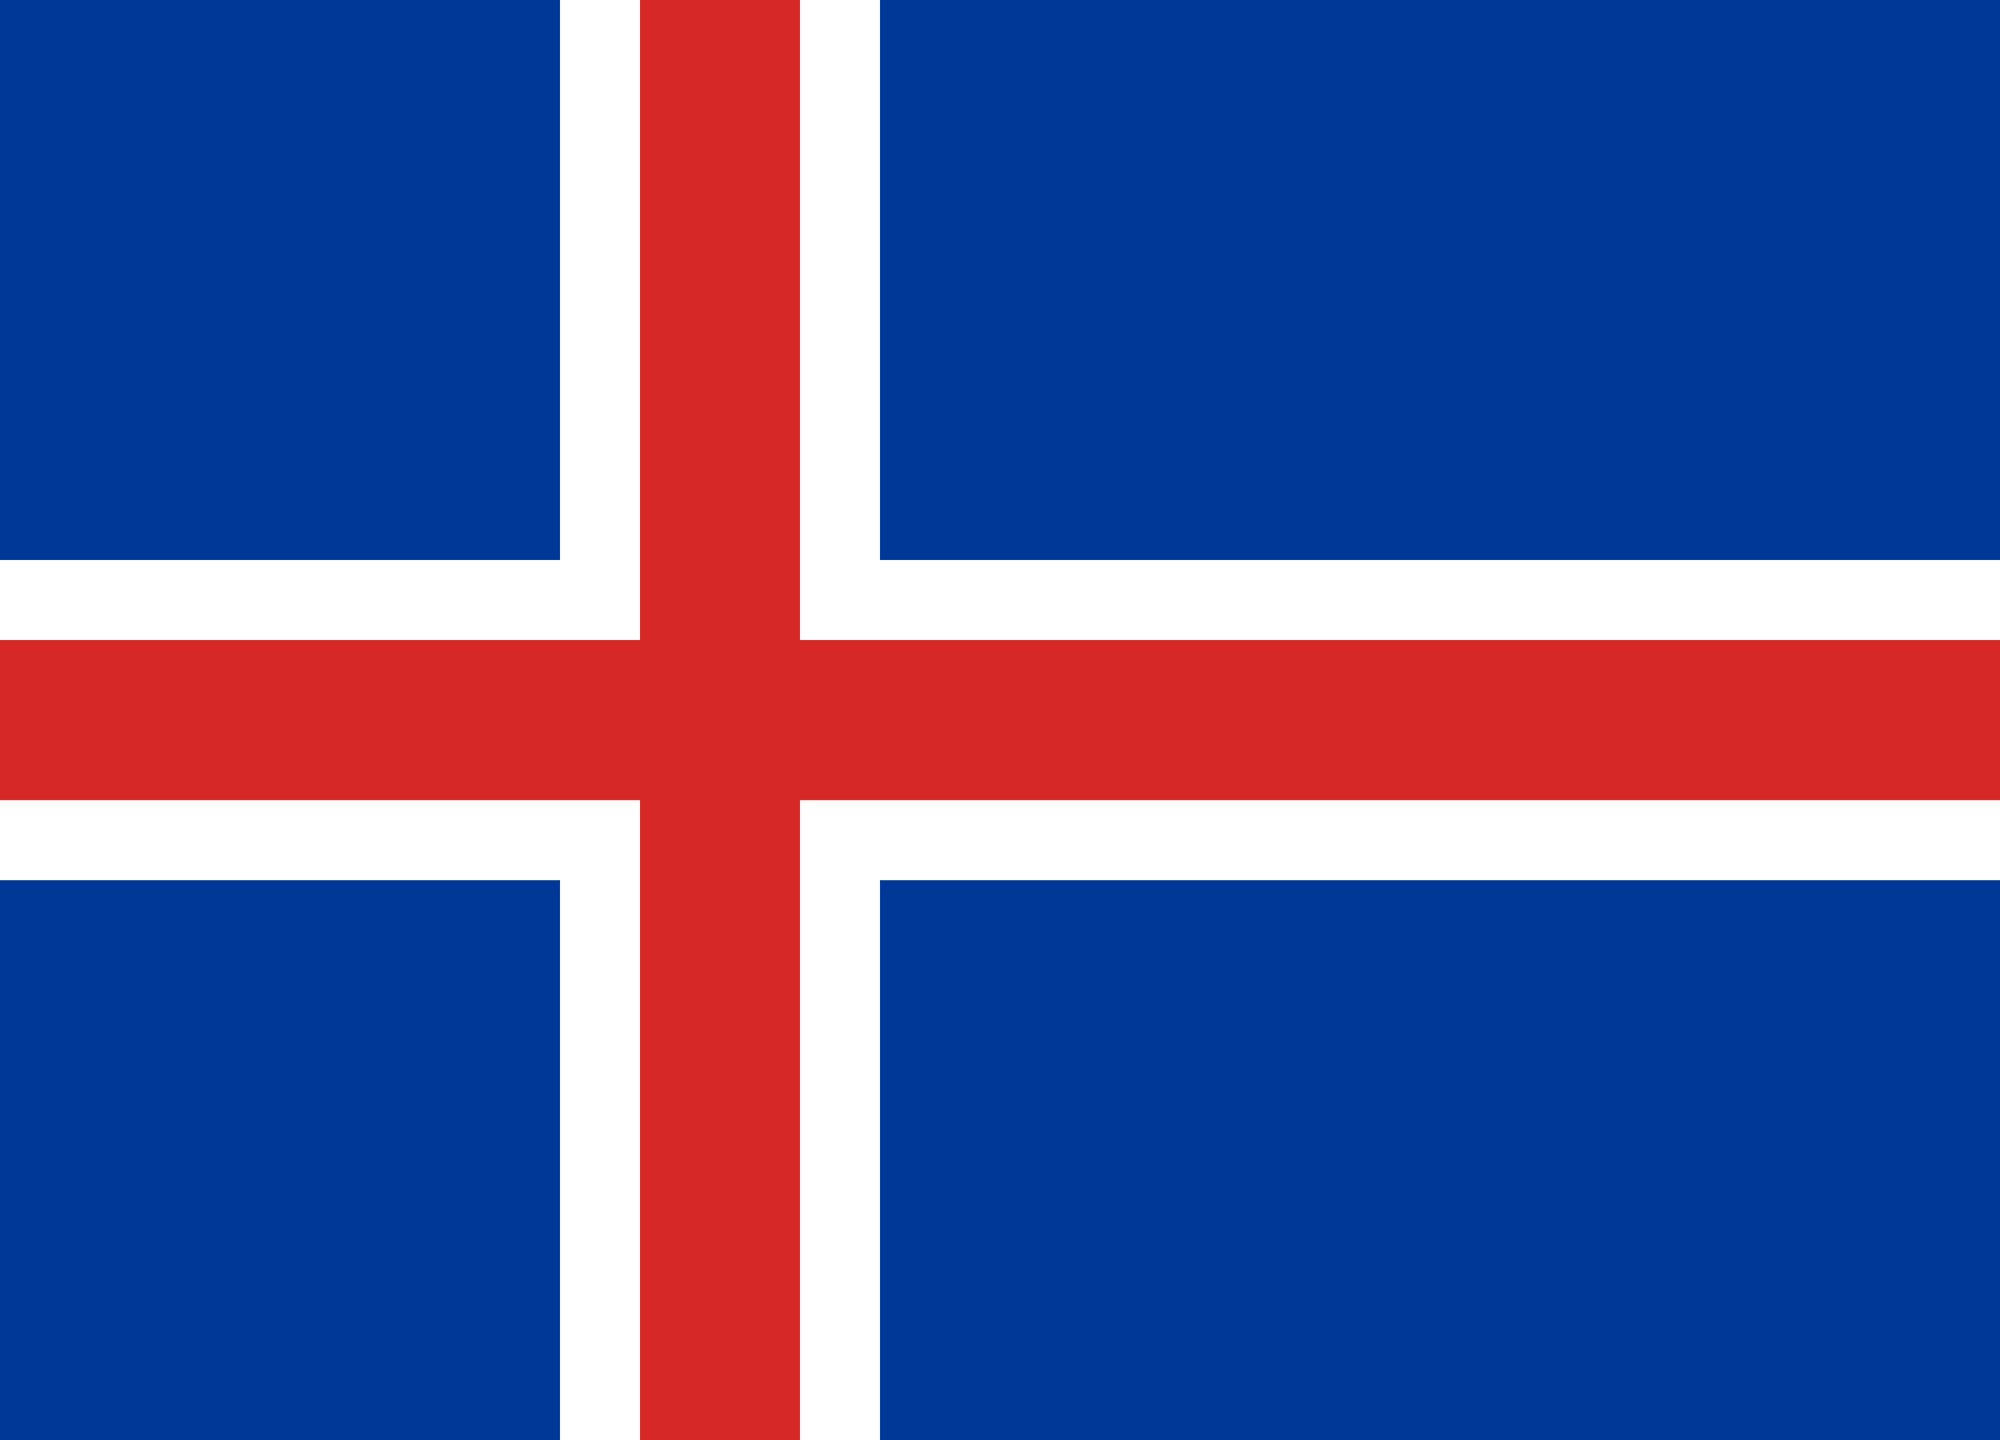 The flag of Iceland.